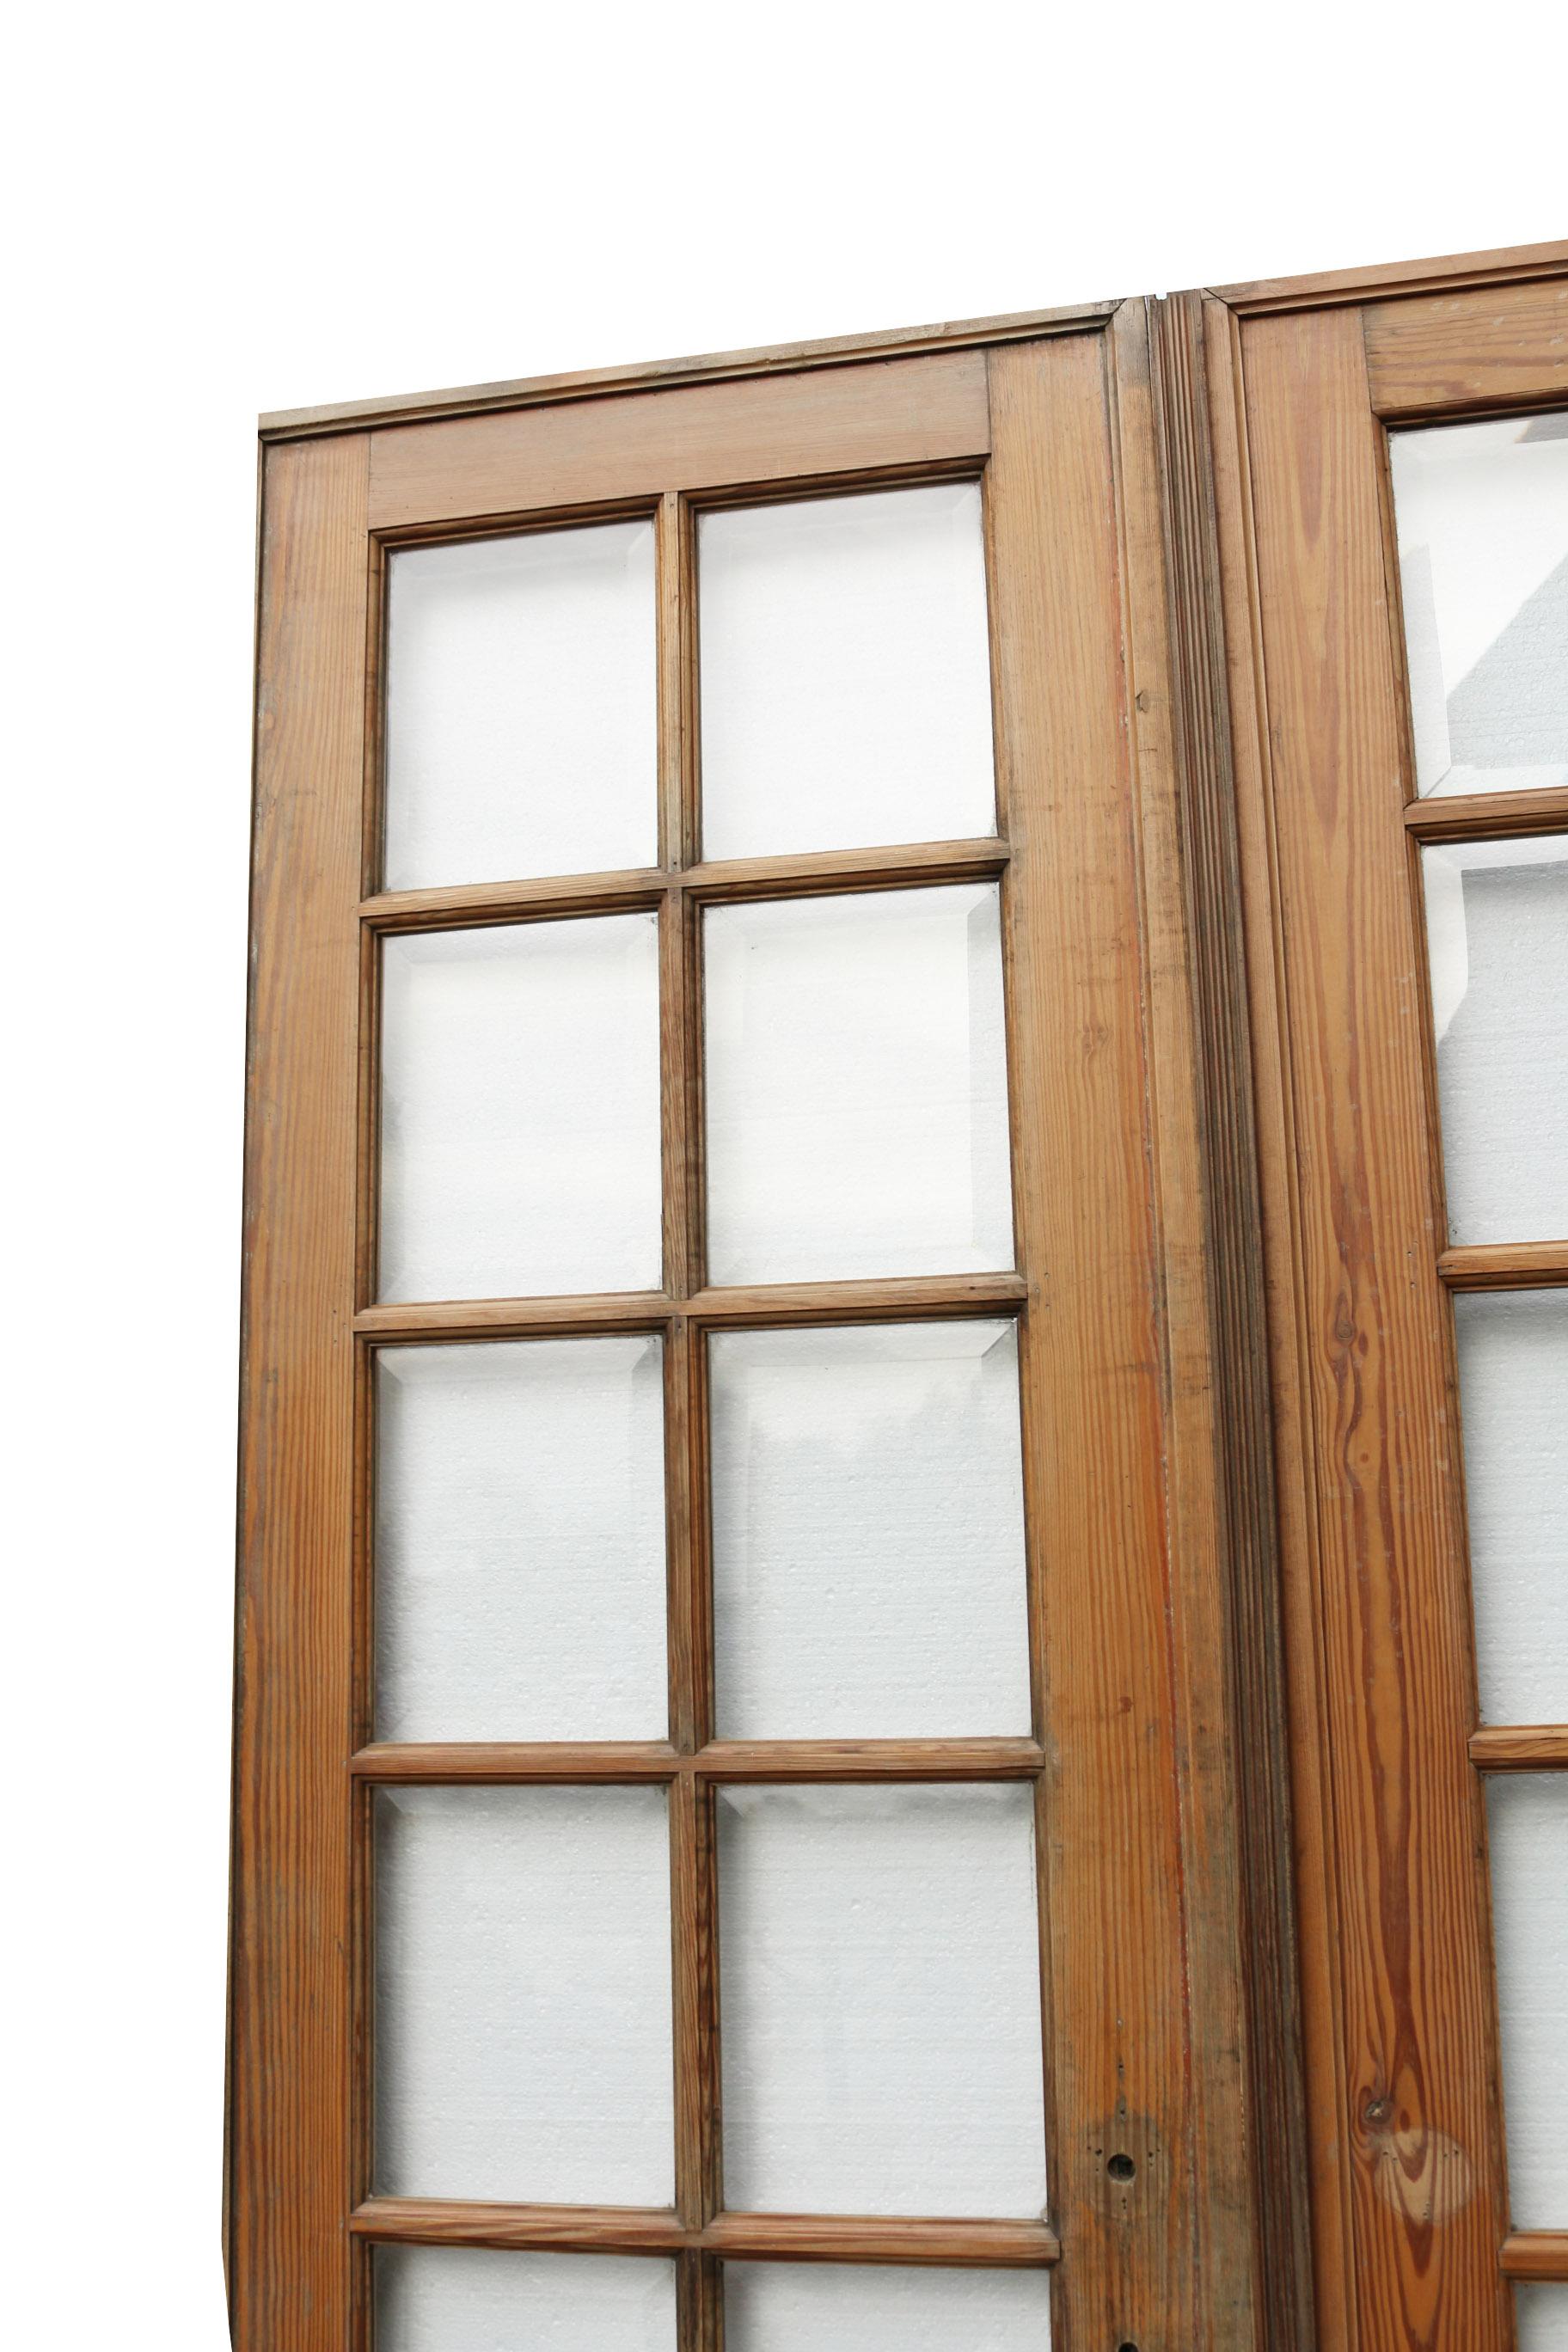 About:

These beautiful French doors feature bevelled glass panes. We have two matching pairs available.

Condition report:

In good condition for their age. Minor scratches to the glass panes. No breaks to the glass. There are no hinges or